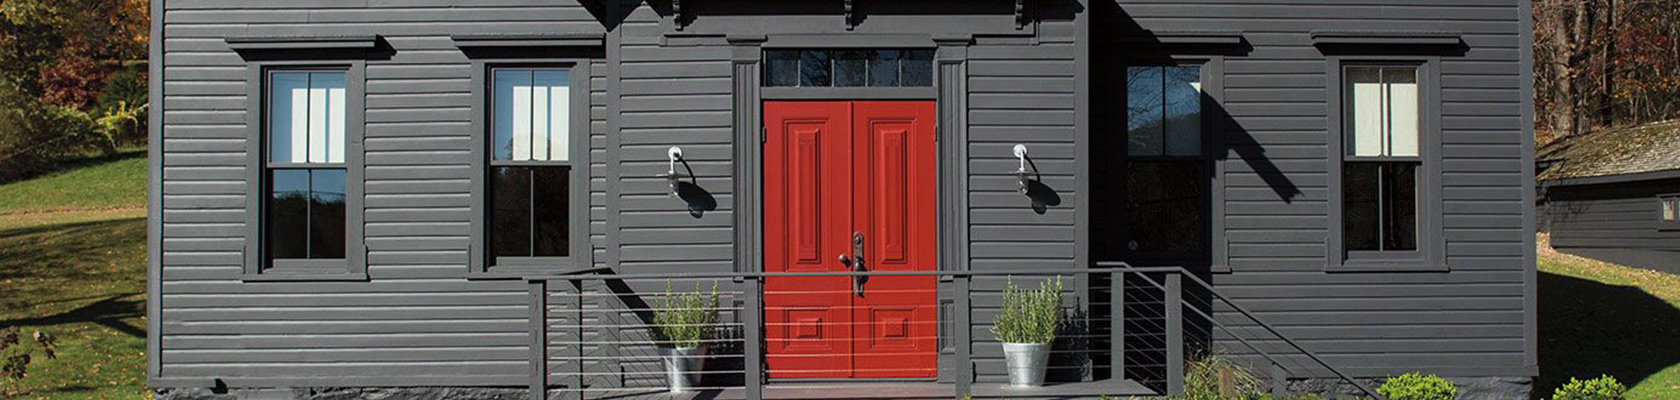 grey house with red front door